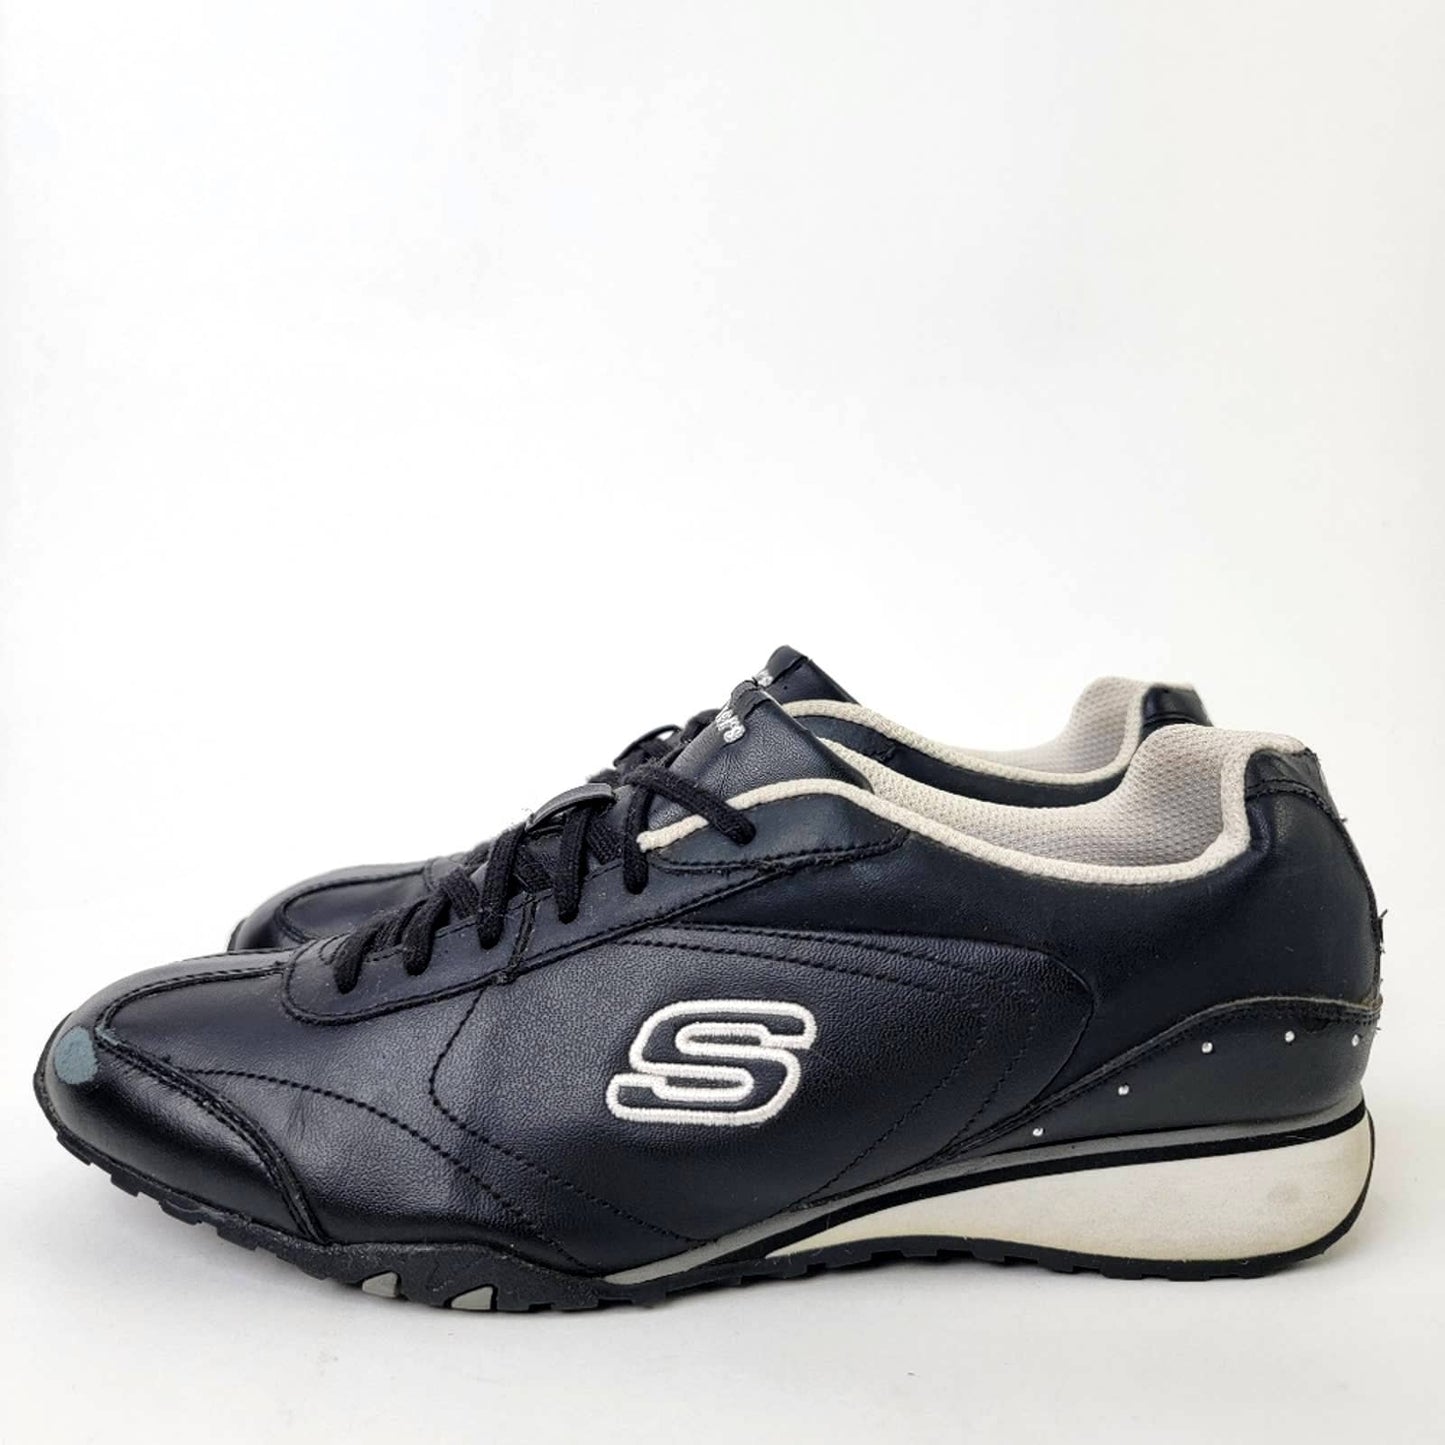 Vintage 2010 Skechers Black White Athletic Leather Running Tennis Shoes - 10=